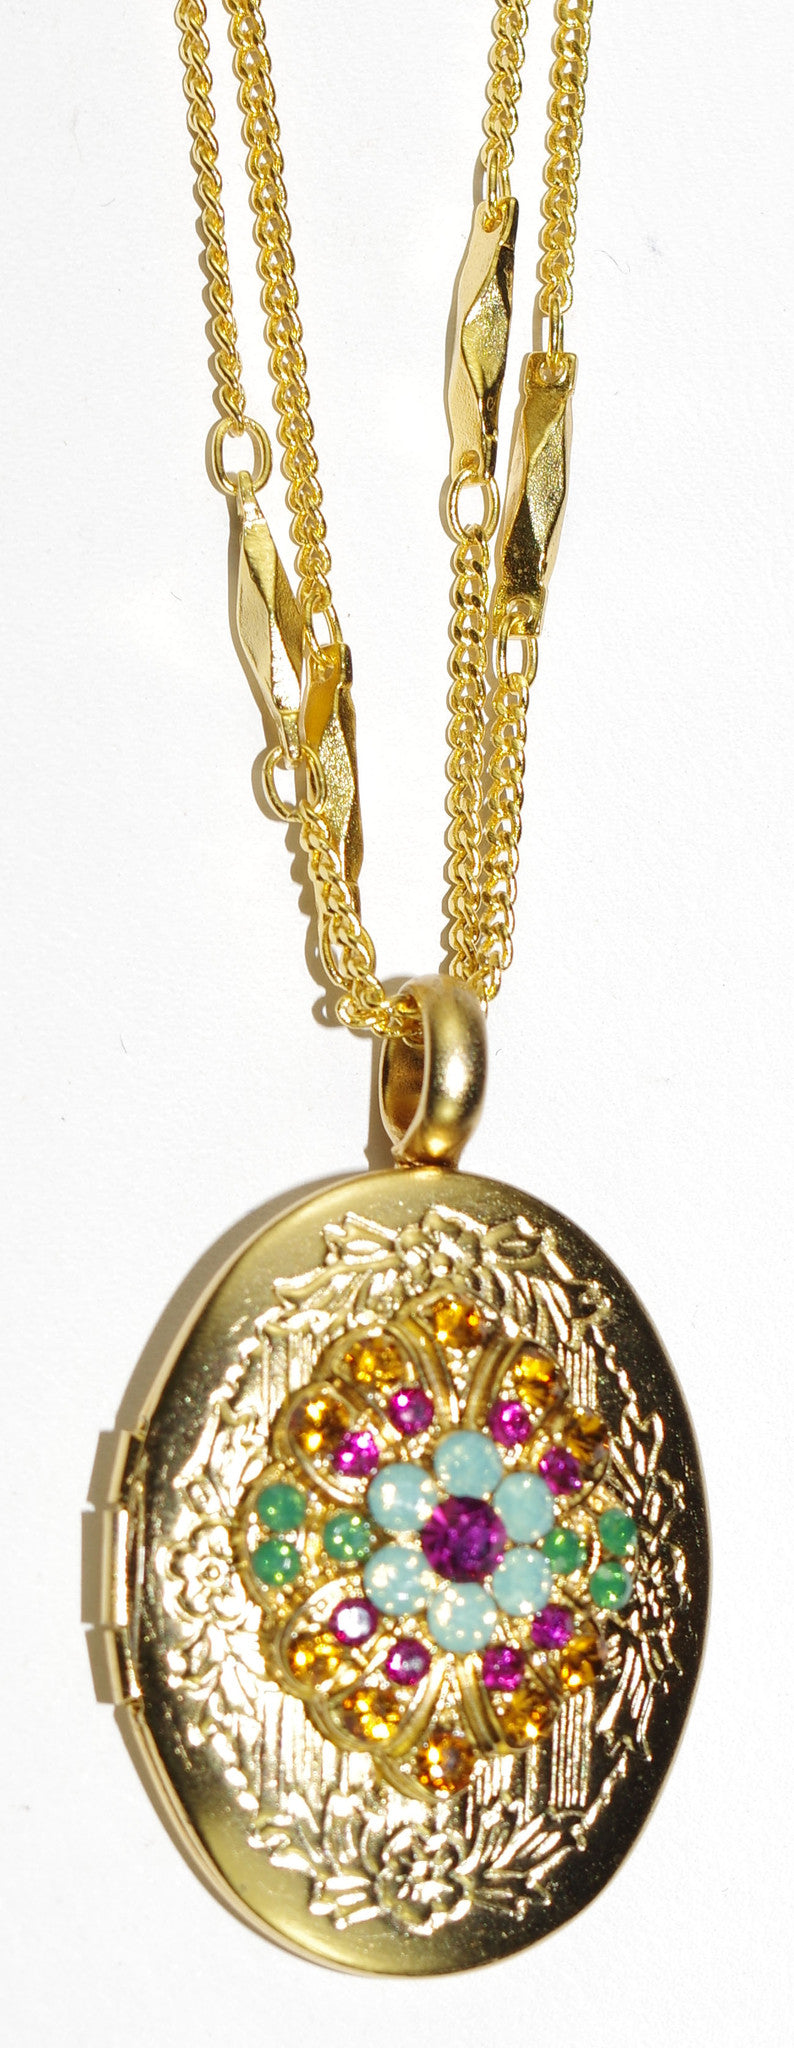 MARIANA PENDANT LOCKET HAPPY DAYS:  blue, amber, pink stones in 1" locket in yellow gold setting, 19" adjustable chain